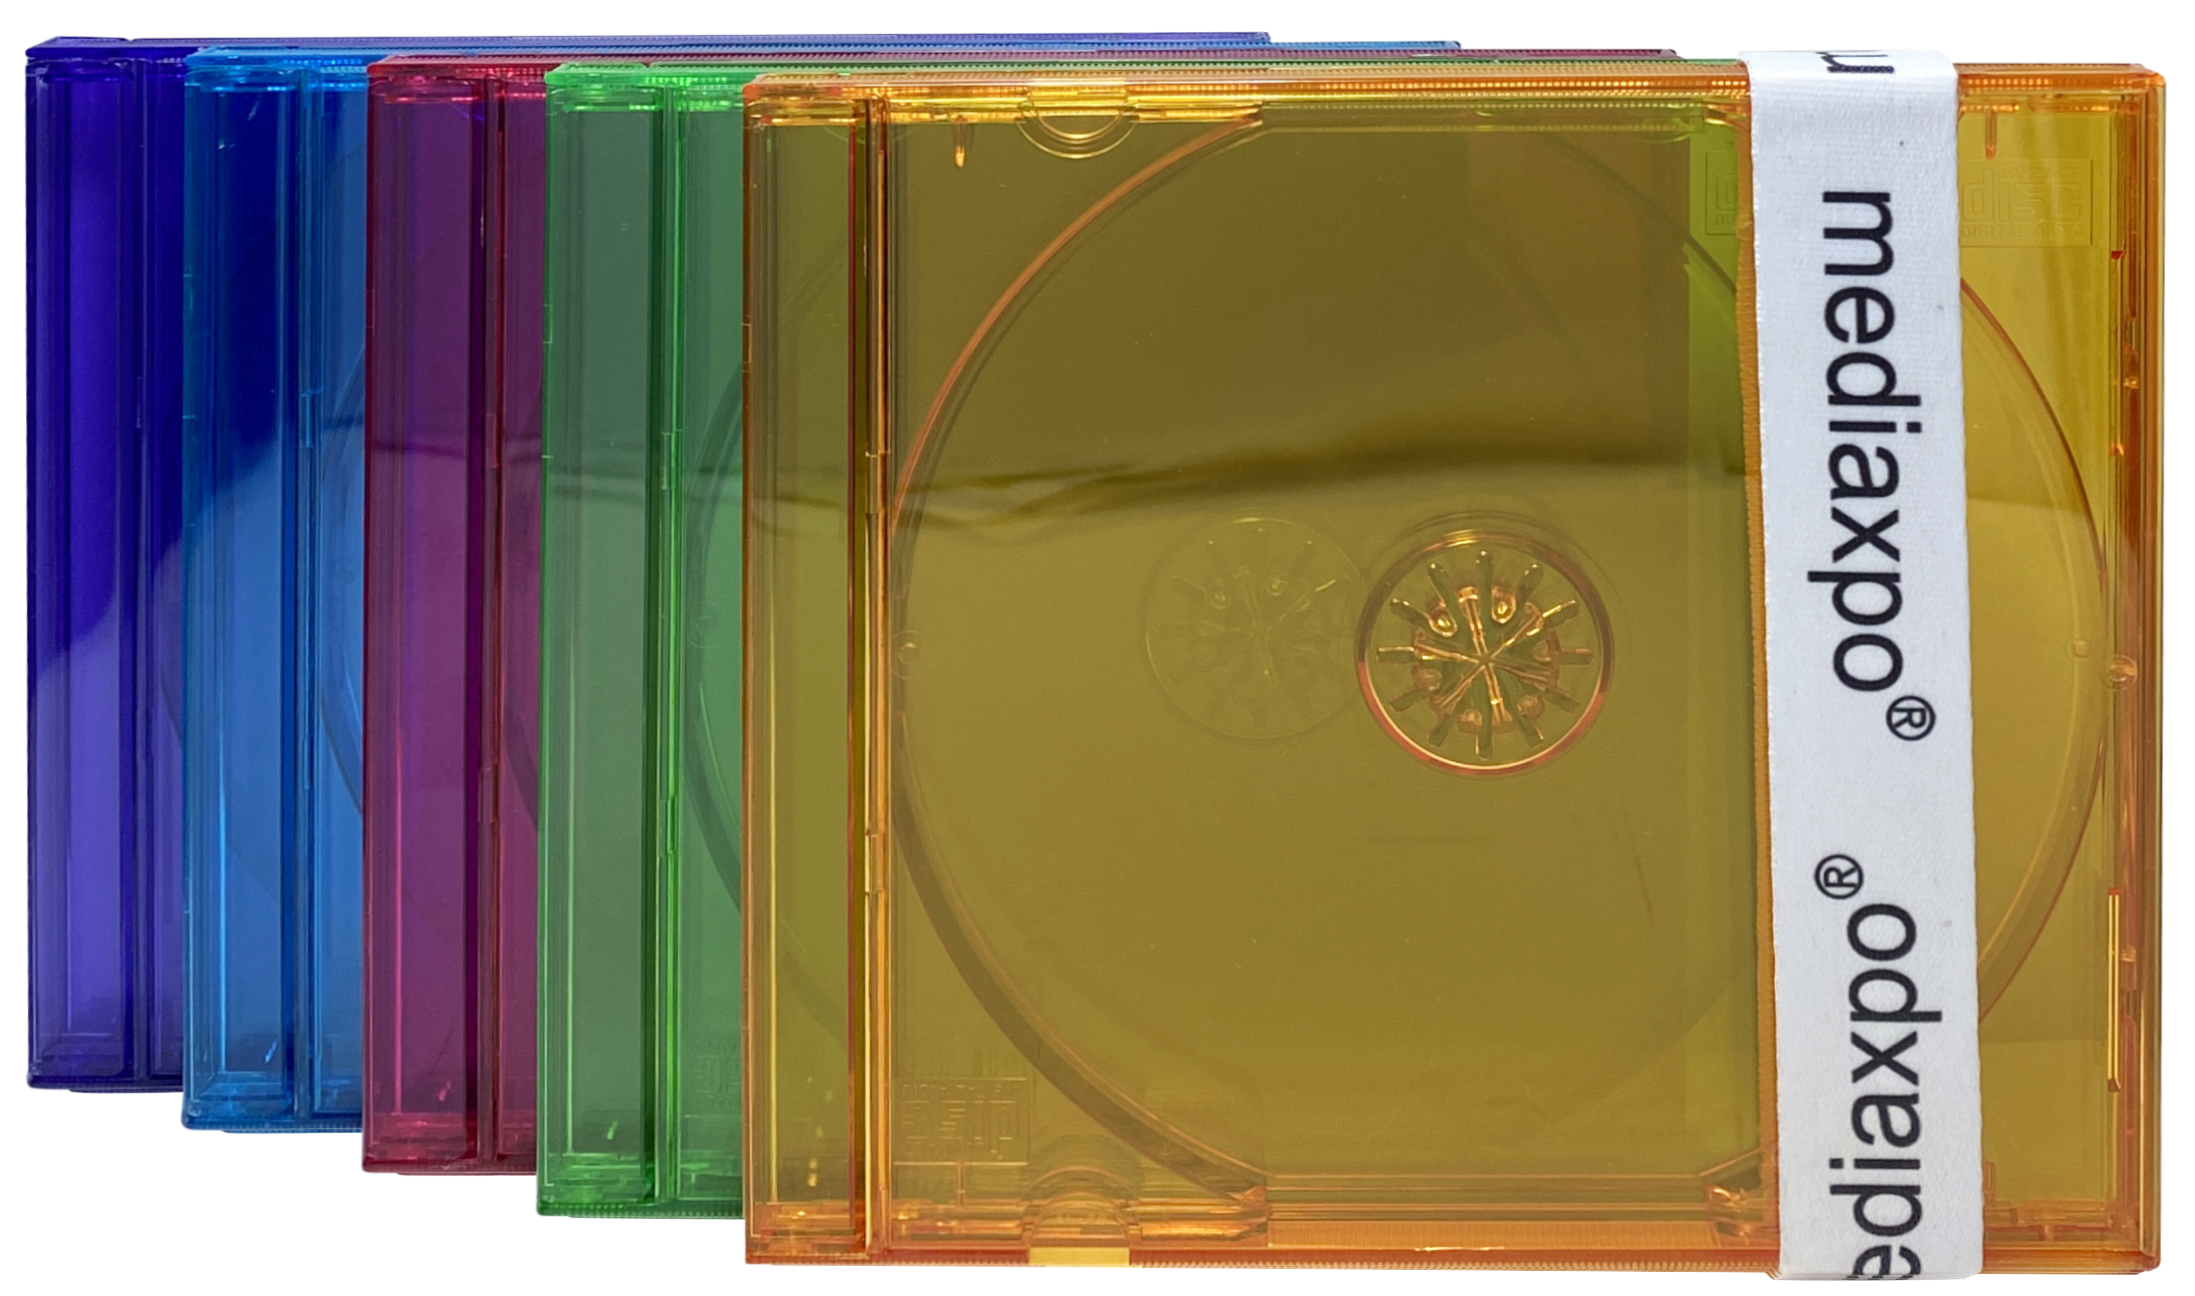 Image of ID 1214259010 400 STANDARD Assorted Clear Color CD Jewel Case